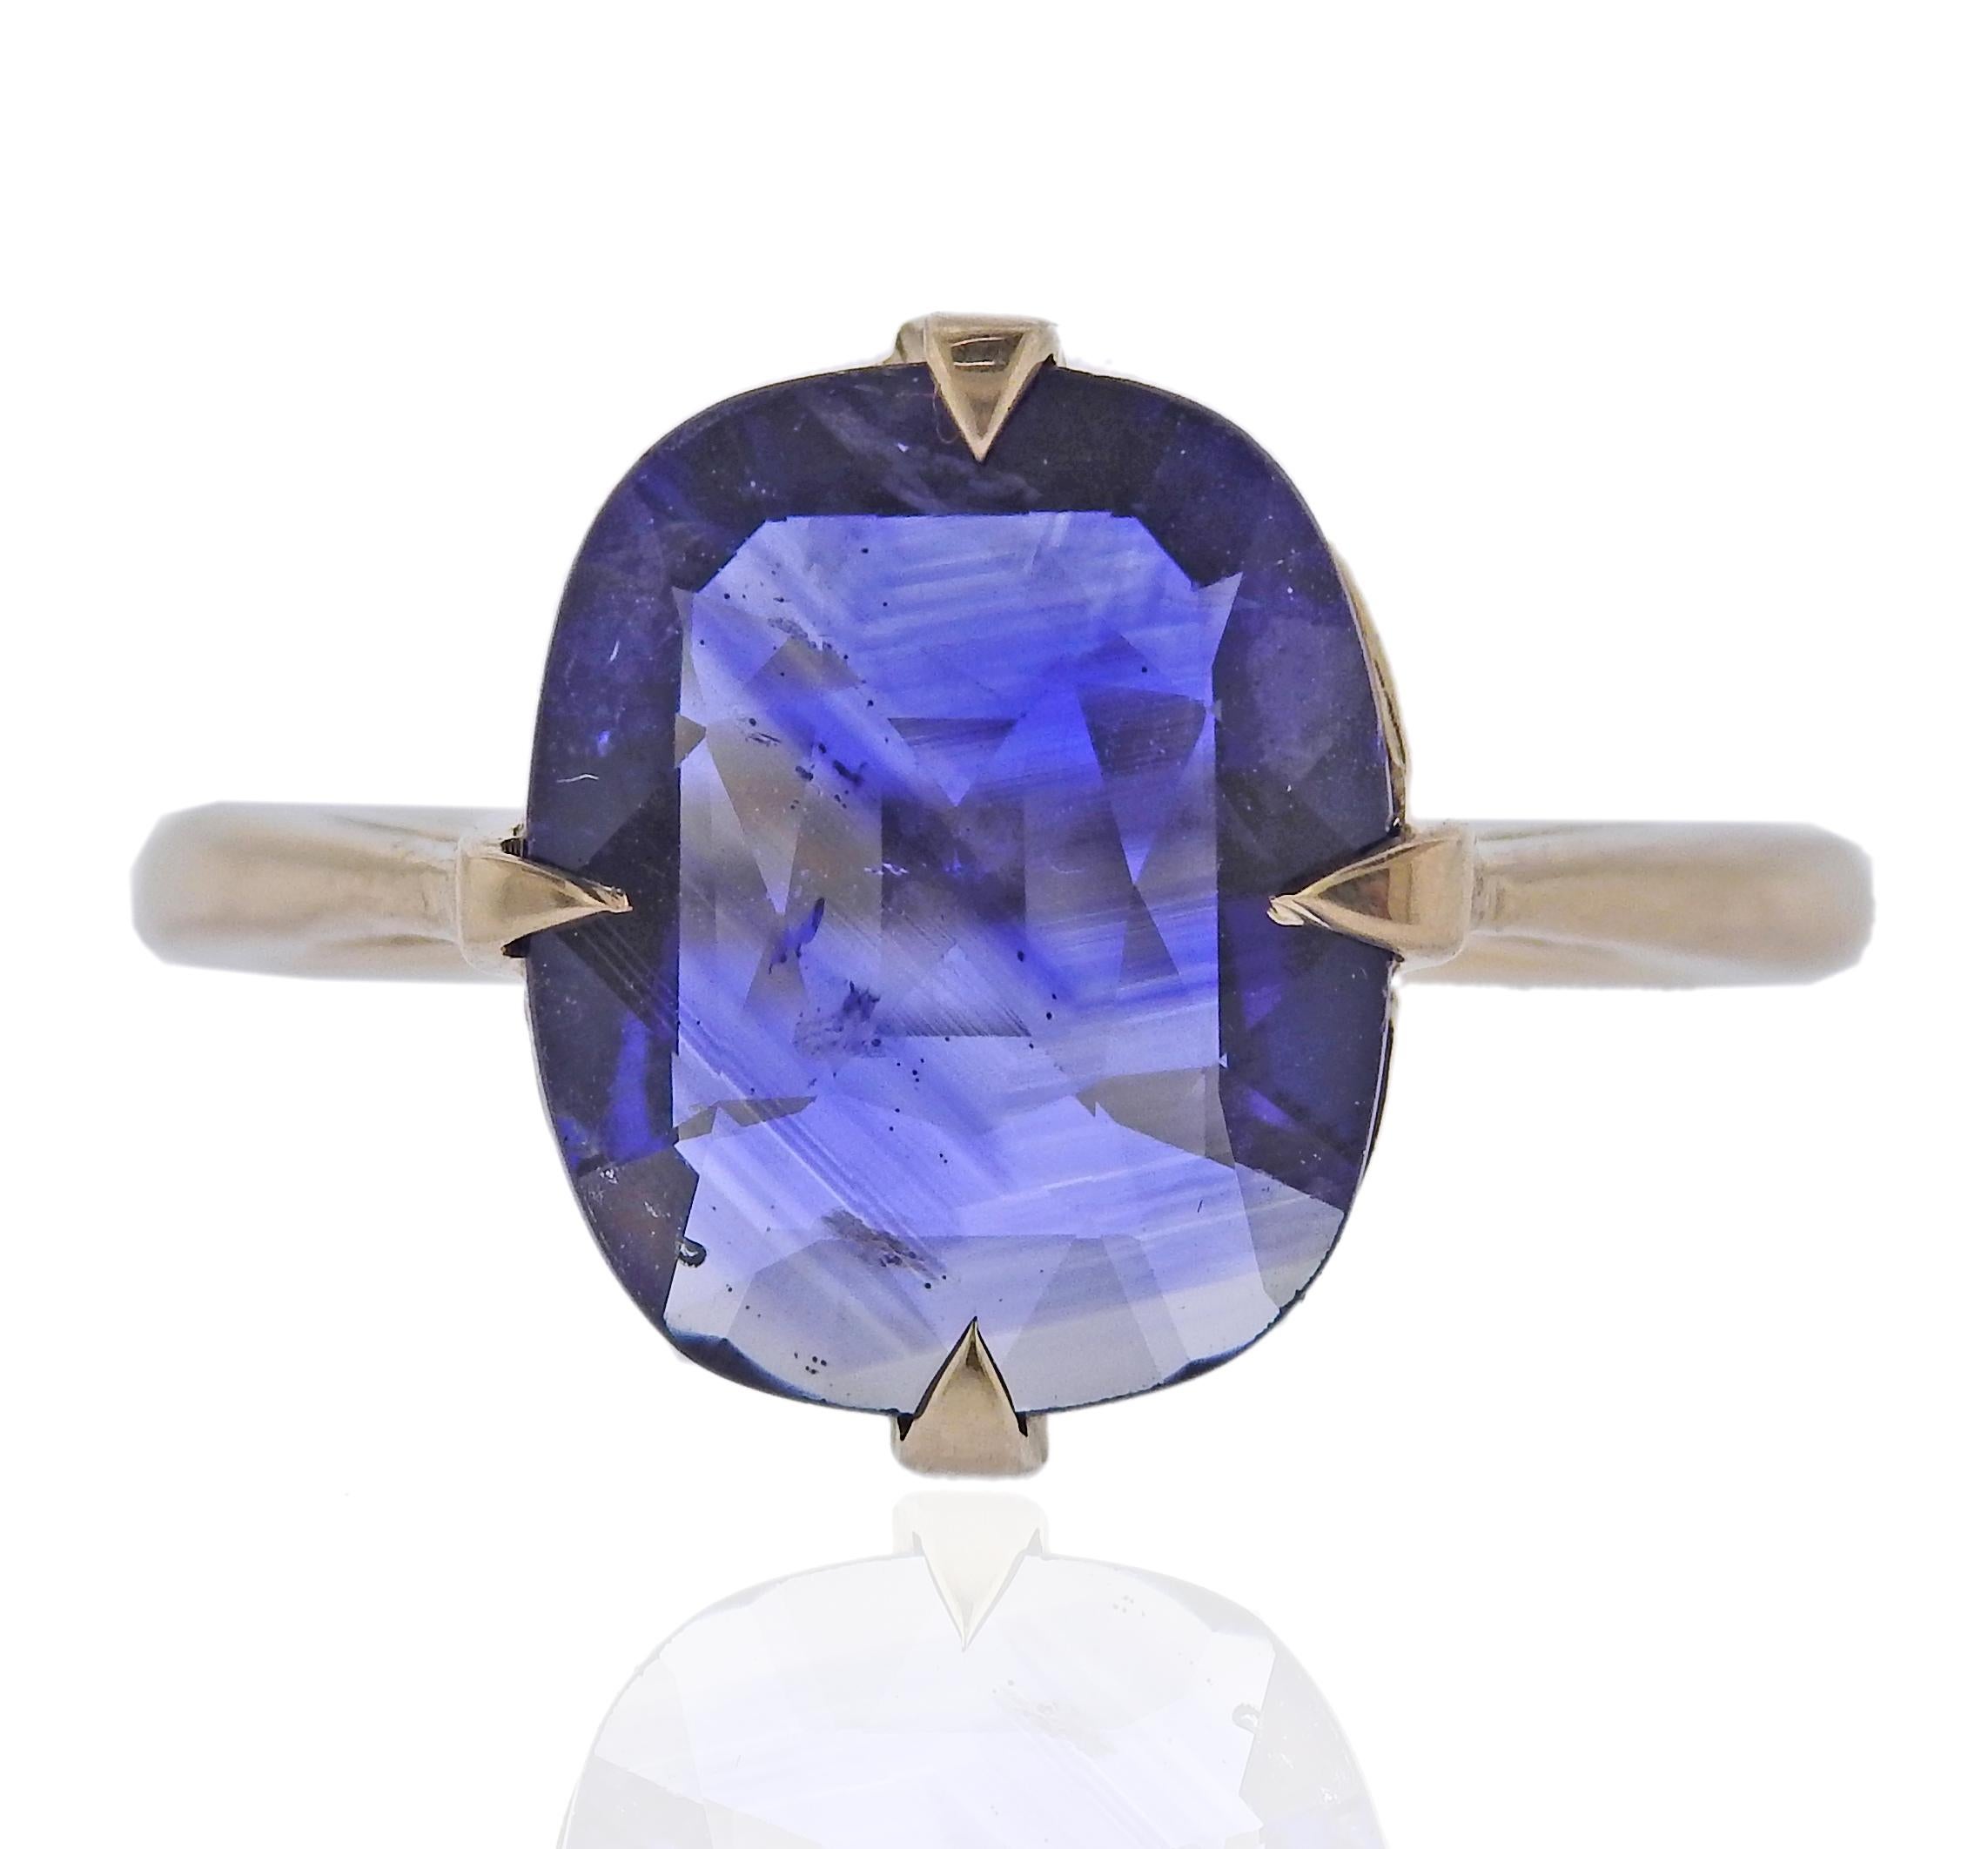 14k god ring with approx. 3.59ct sapphire by formula (measures 11.9 x 9.8 x 3.5mm). Ring size 6 (EU 53). Weight 3.5 grams.